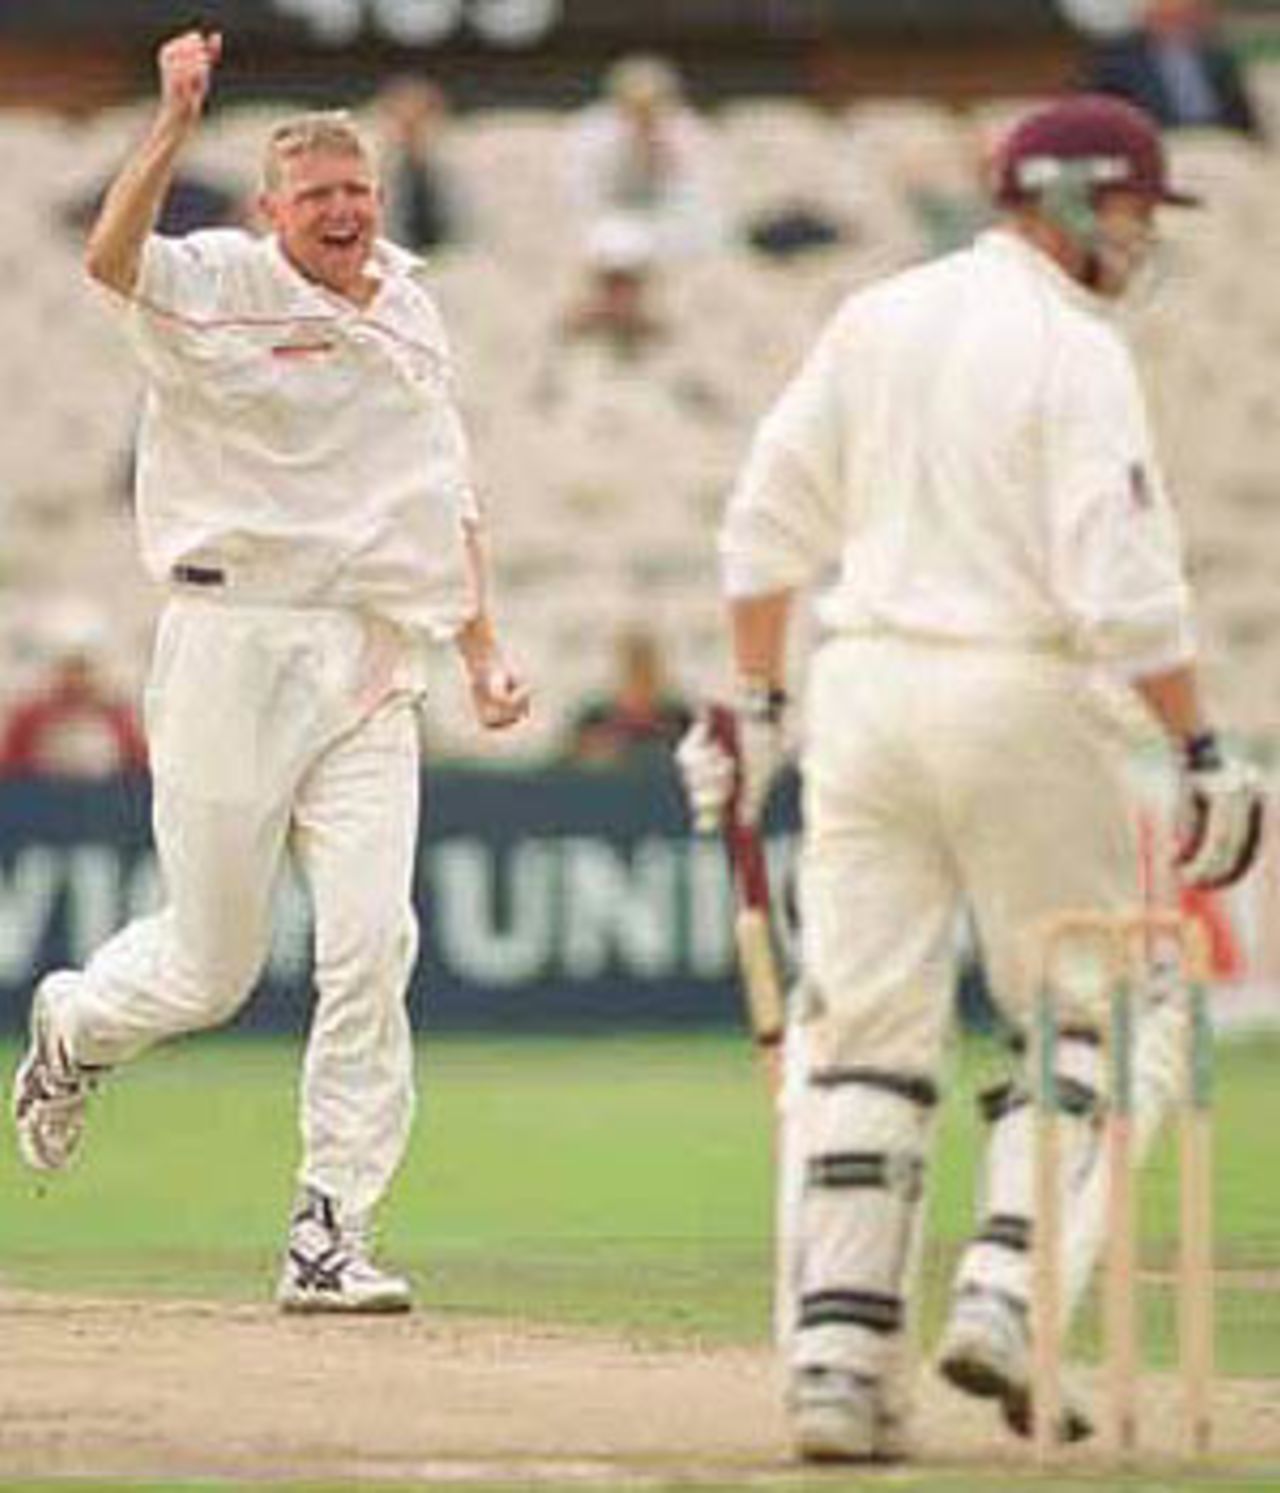 Peter Martin celebrates getting out Burns, PPP healthcare County Championship Division One, 2000, Lancashire v Somerset, Old Trafford, Manchester, 08-10 September 2000 (Day 3).